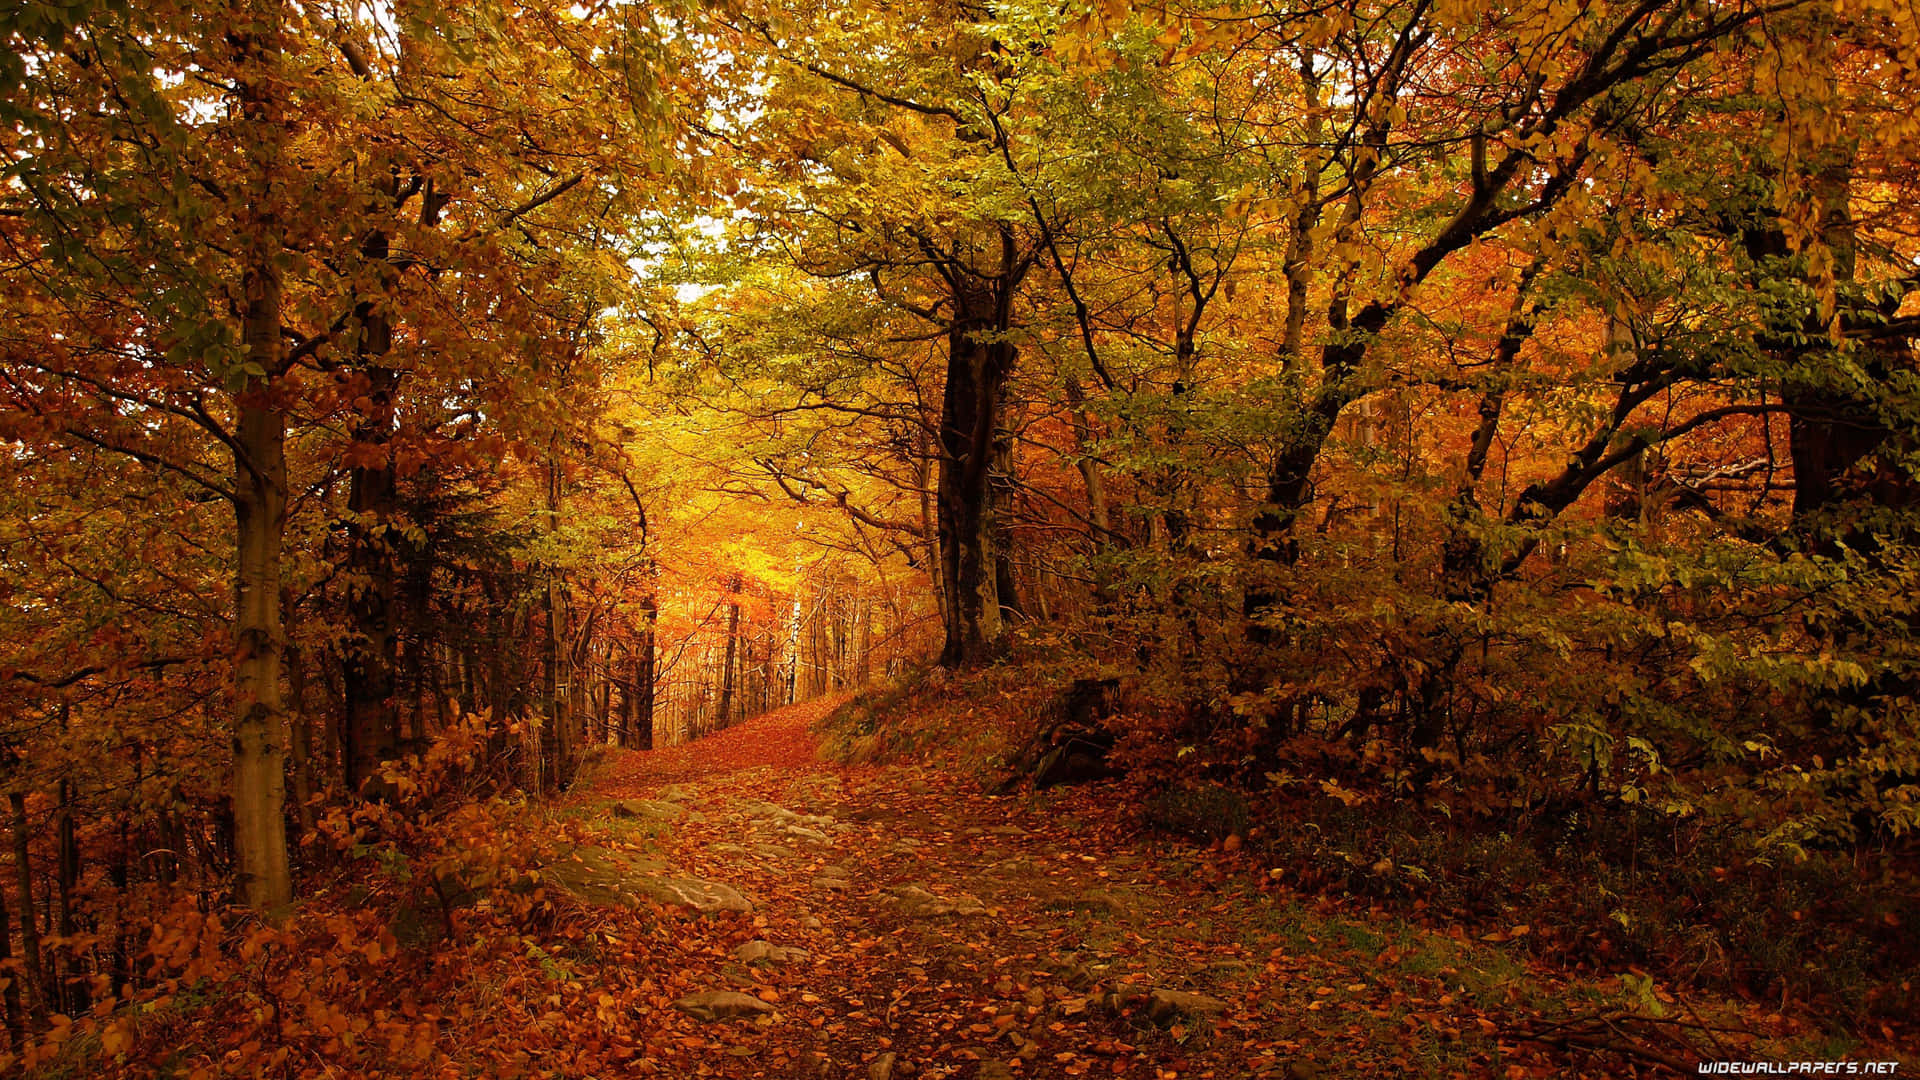 Enjoy the beauty of Autumn with a 3840 x 2160 photo Wallpaper